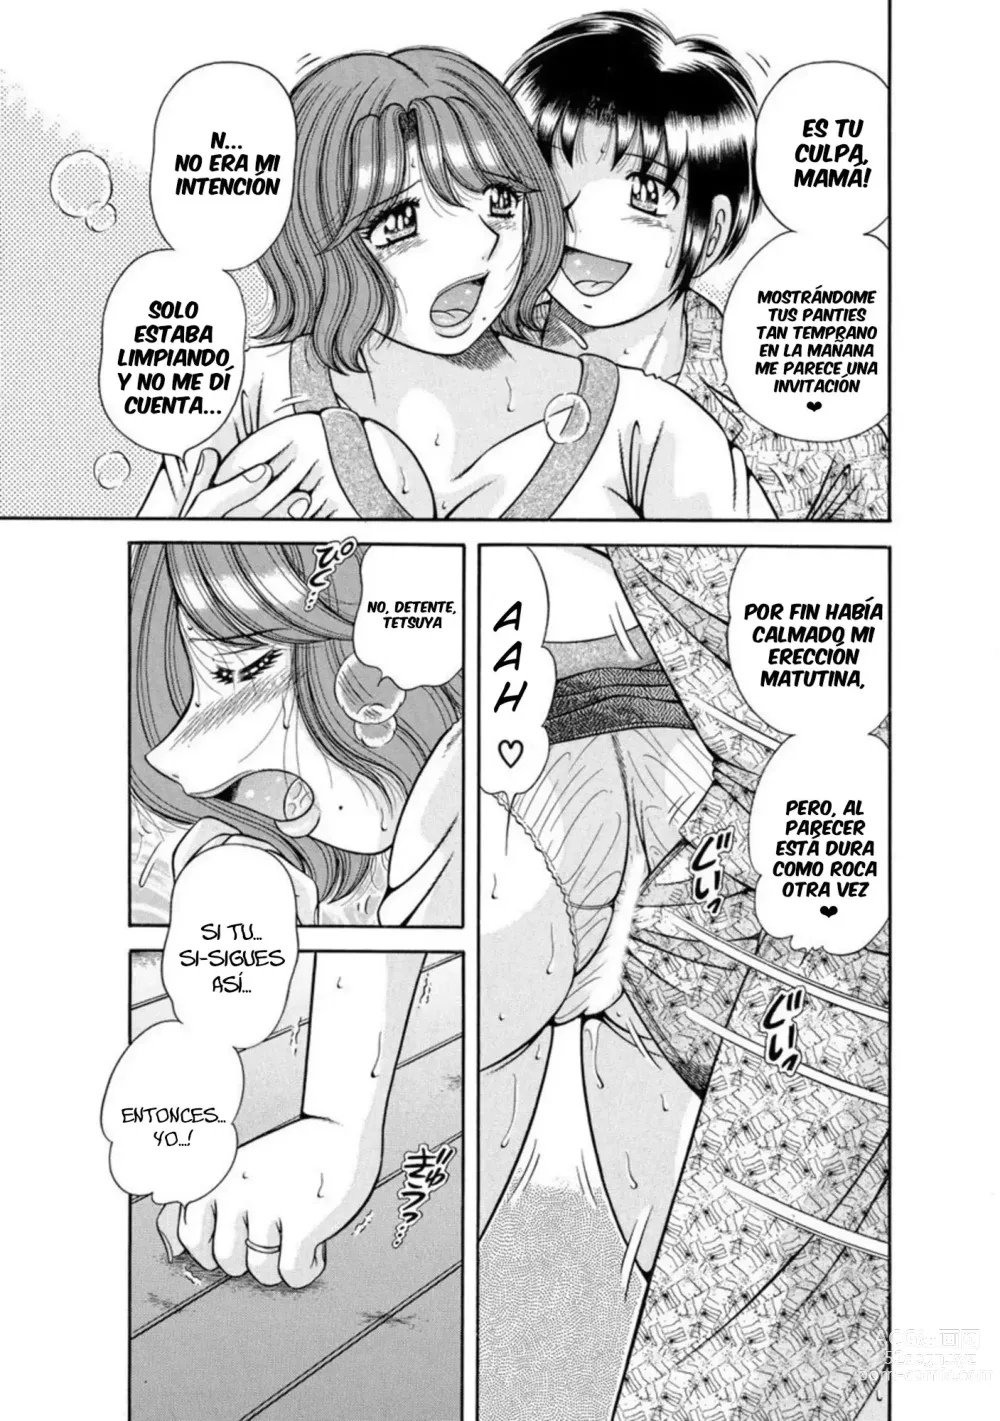 Page 4 of manga Mother and Big and Little Sisters. As Much Sex as You Want, Every Day, With All 5 of Them. Part 2